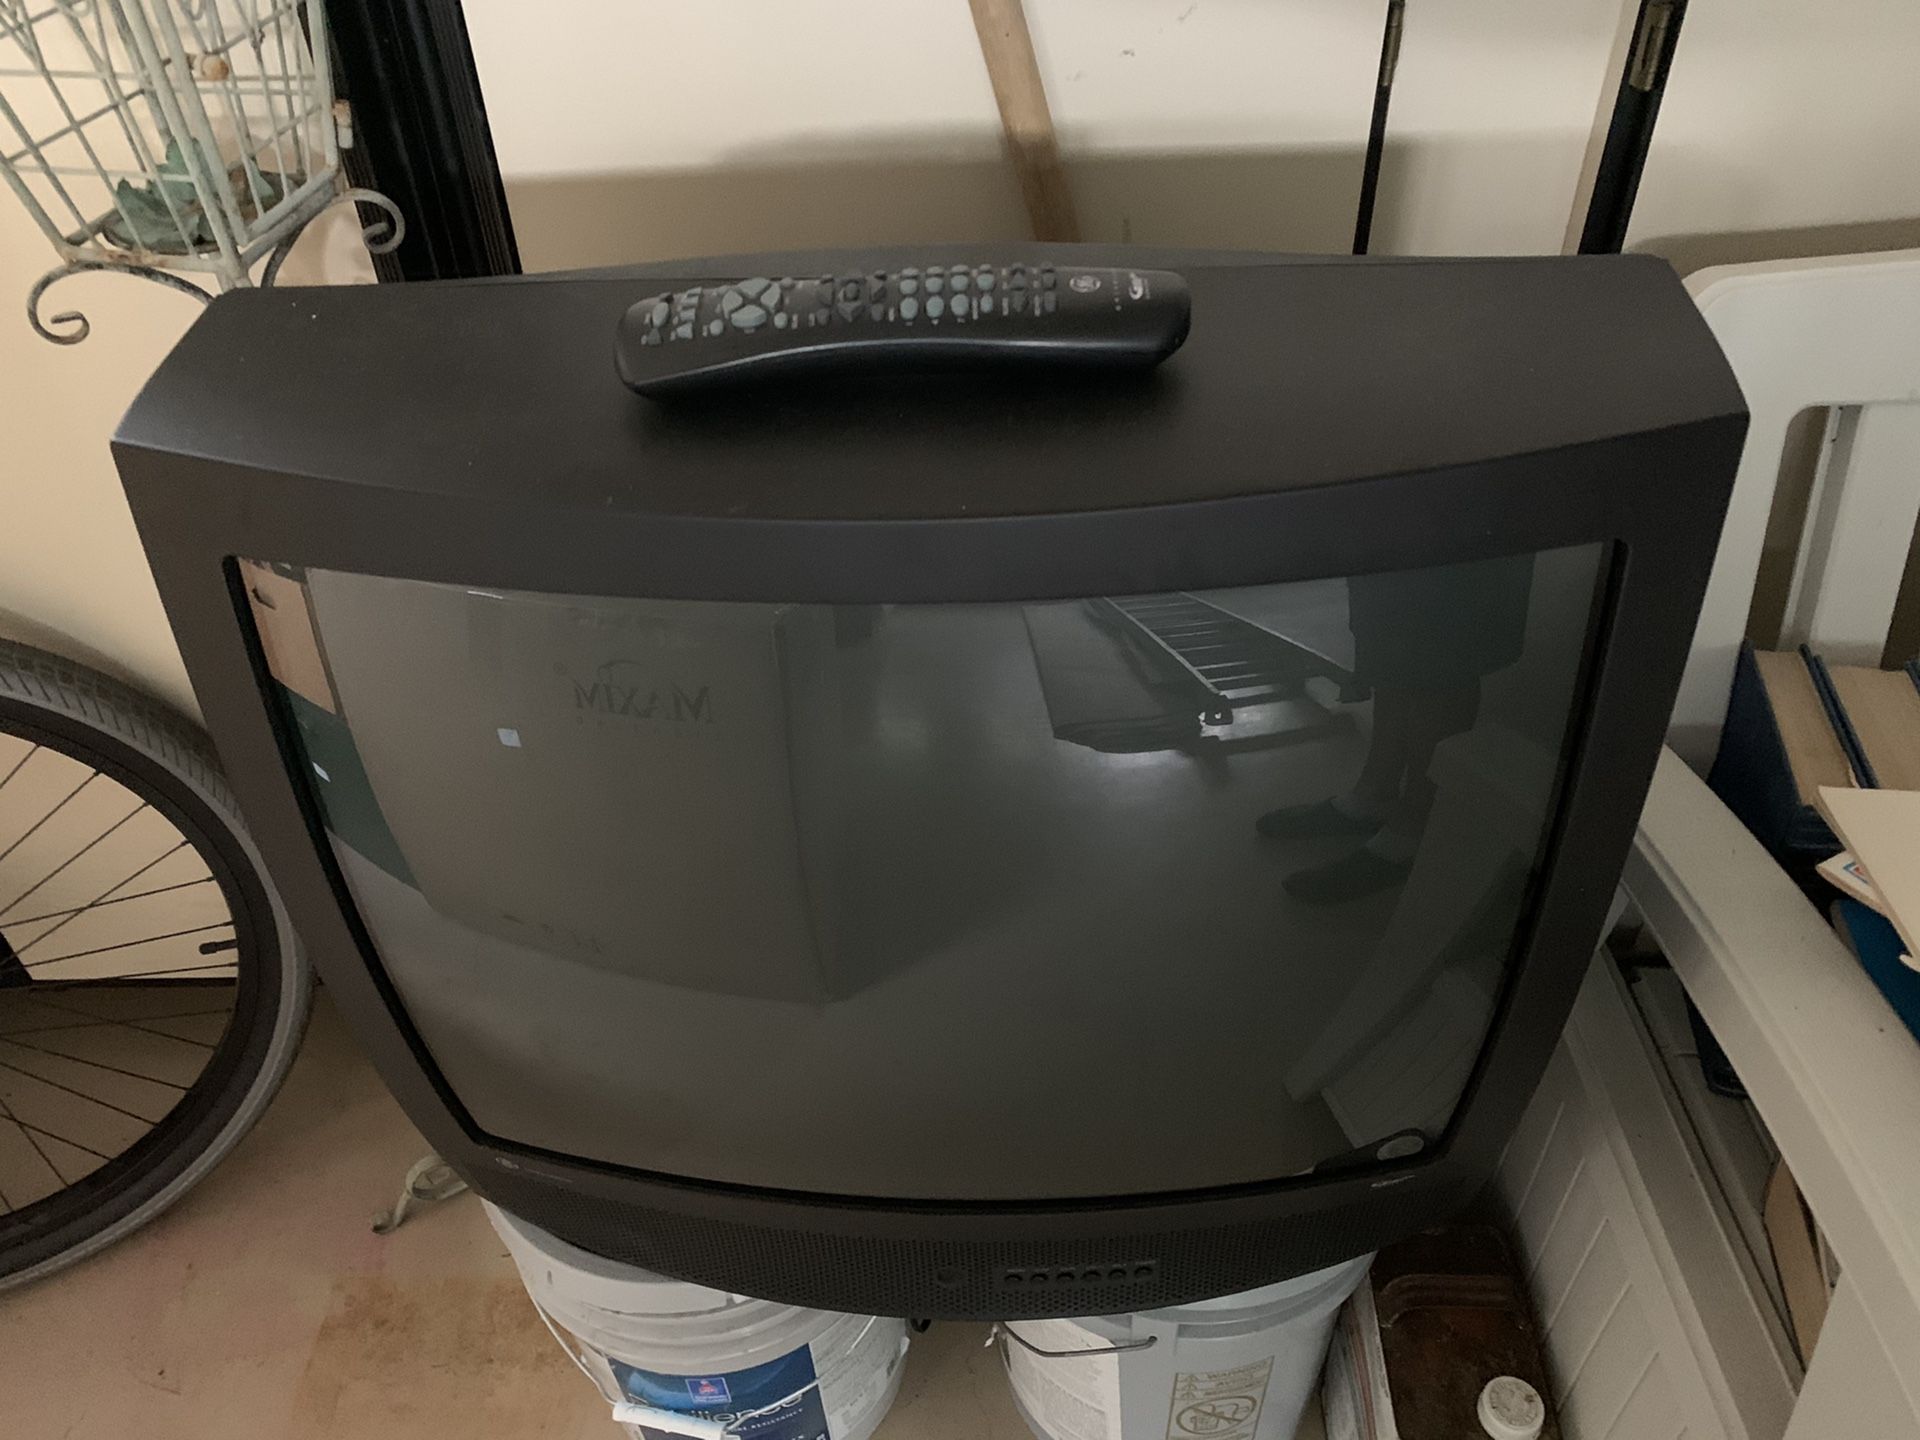 Free!!! General Electric TV 25 inch